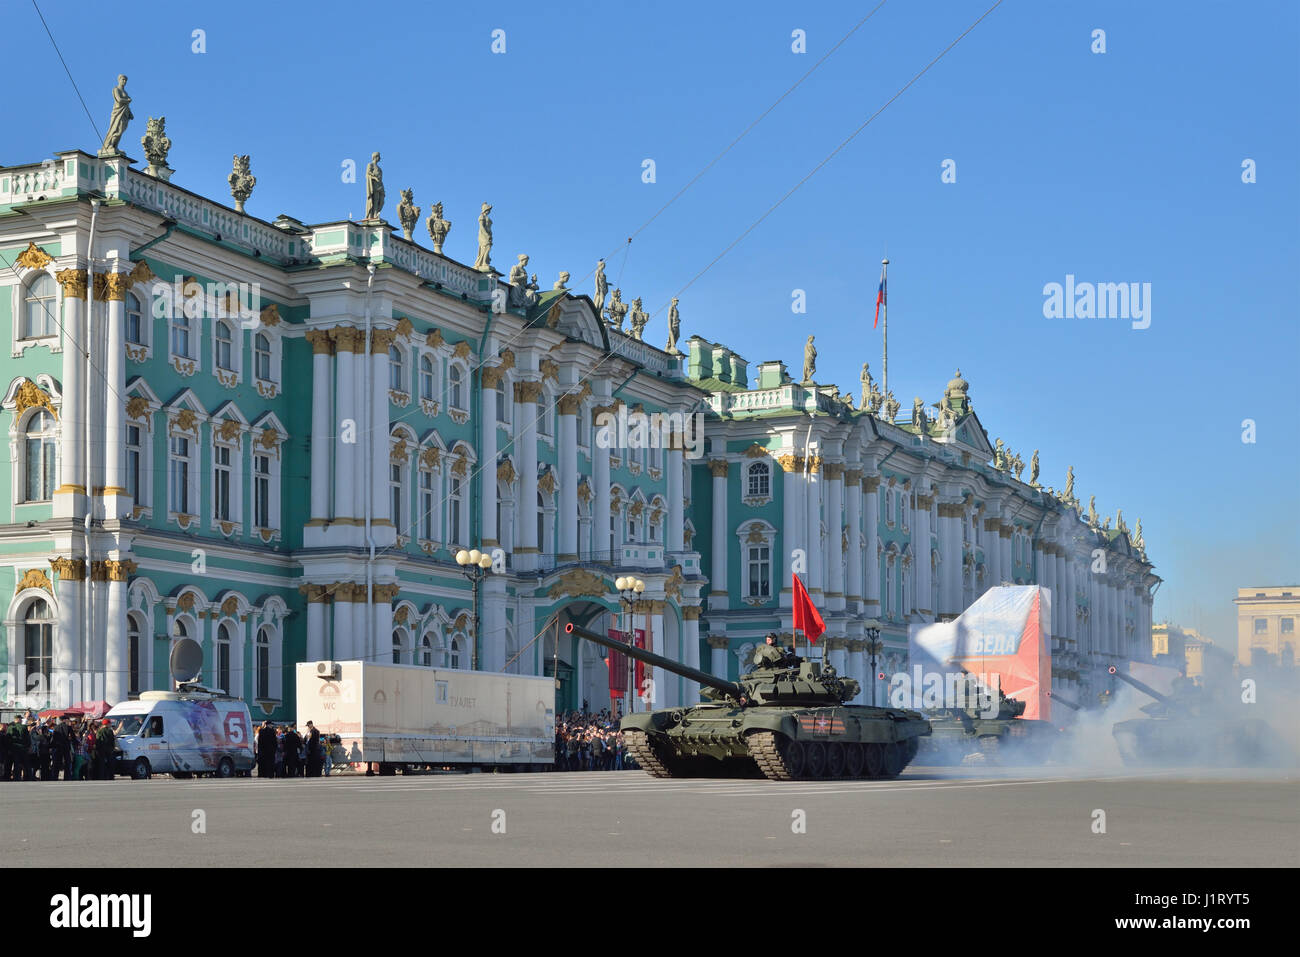 ST.PETERSBURG, RUSSIA - MAY 05, 2016:  Tanks T-90 with a red flag in a puff of smoke at the Palace square during a rehearsal of the Victory Parade  in Stock Photo